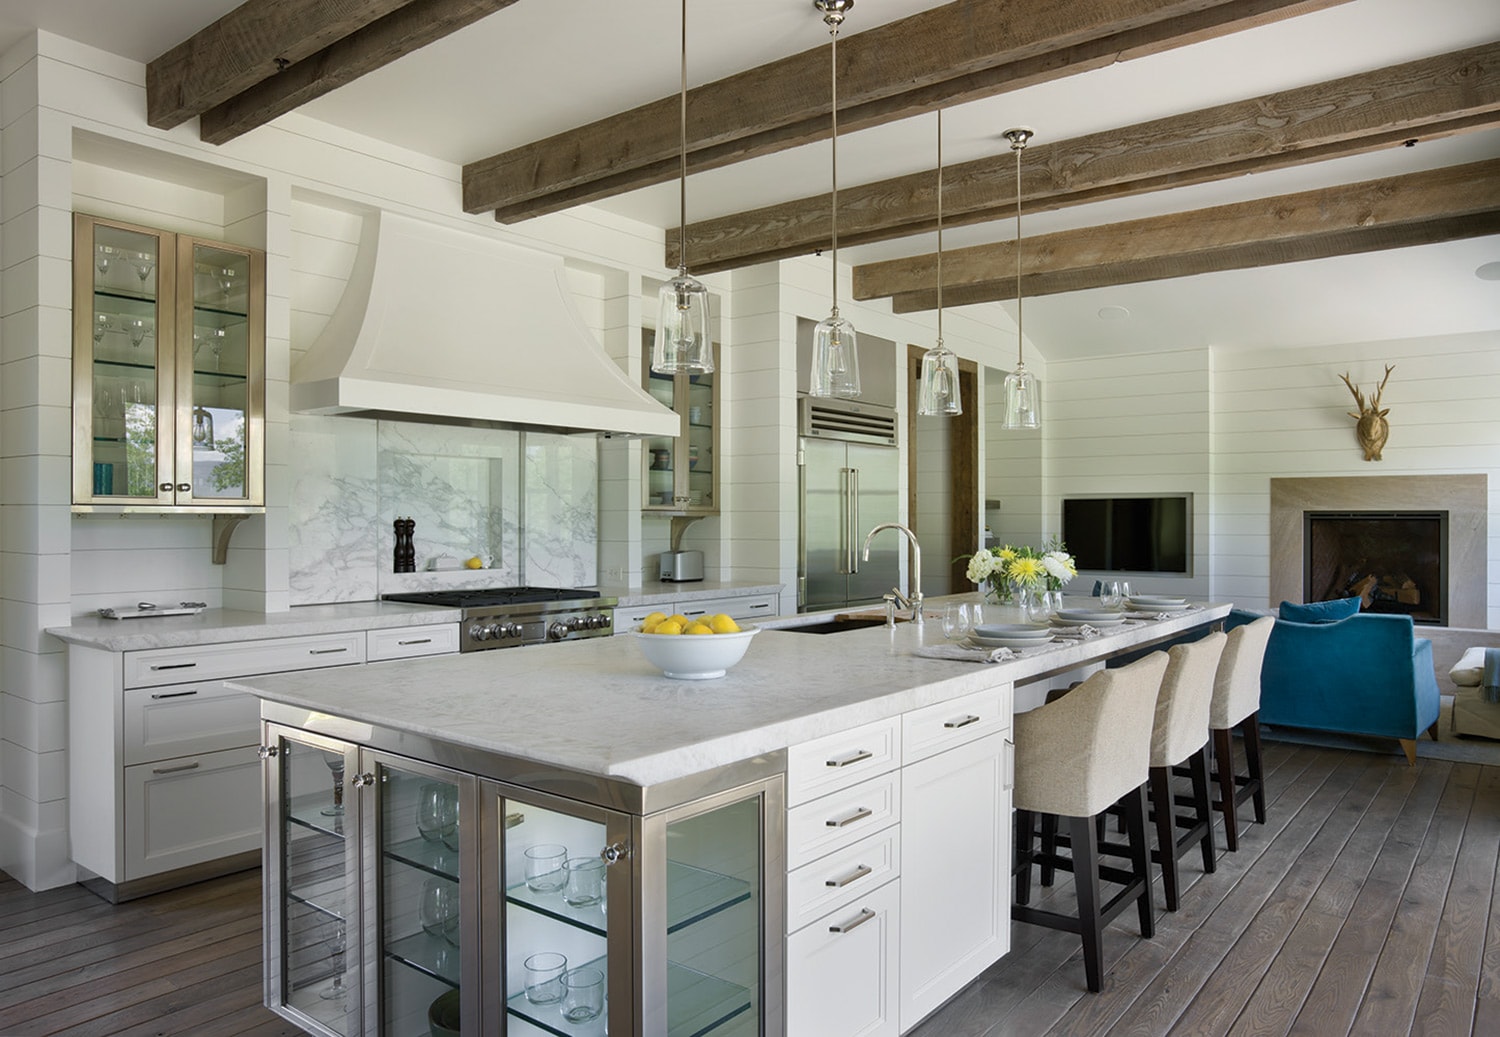 The glass and stainless steel accents give the kitchen a modern flair.